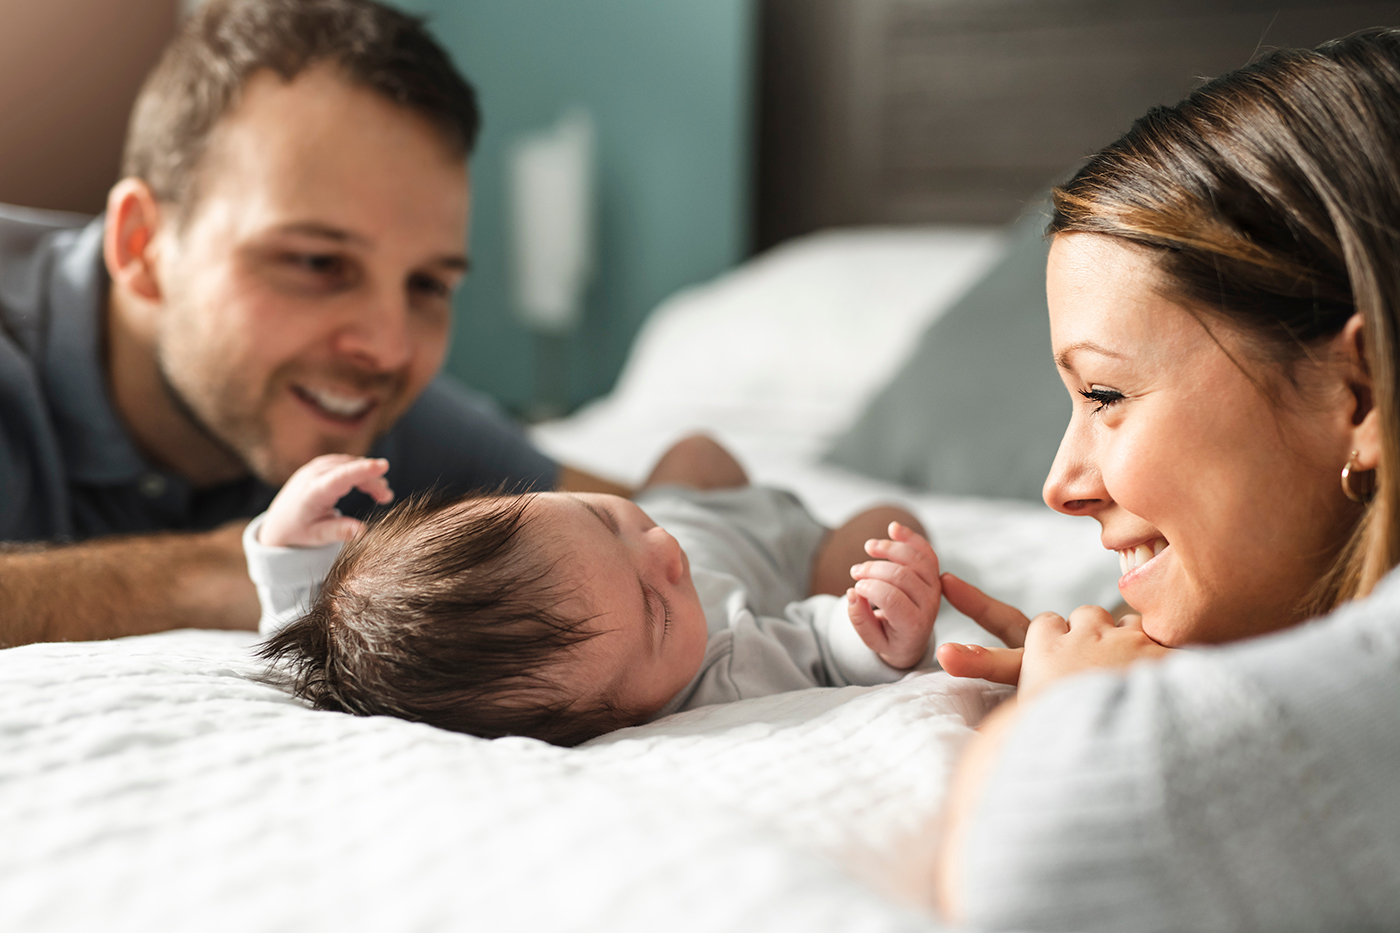 Parents gazing at infant on bed